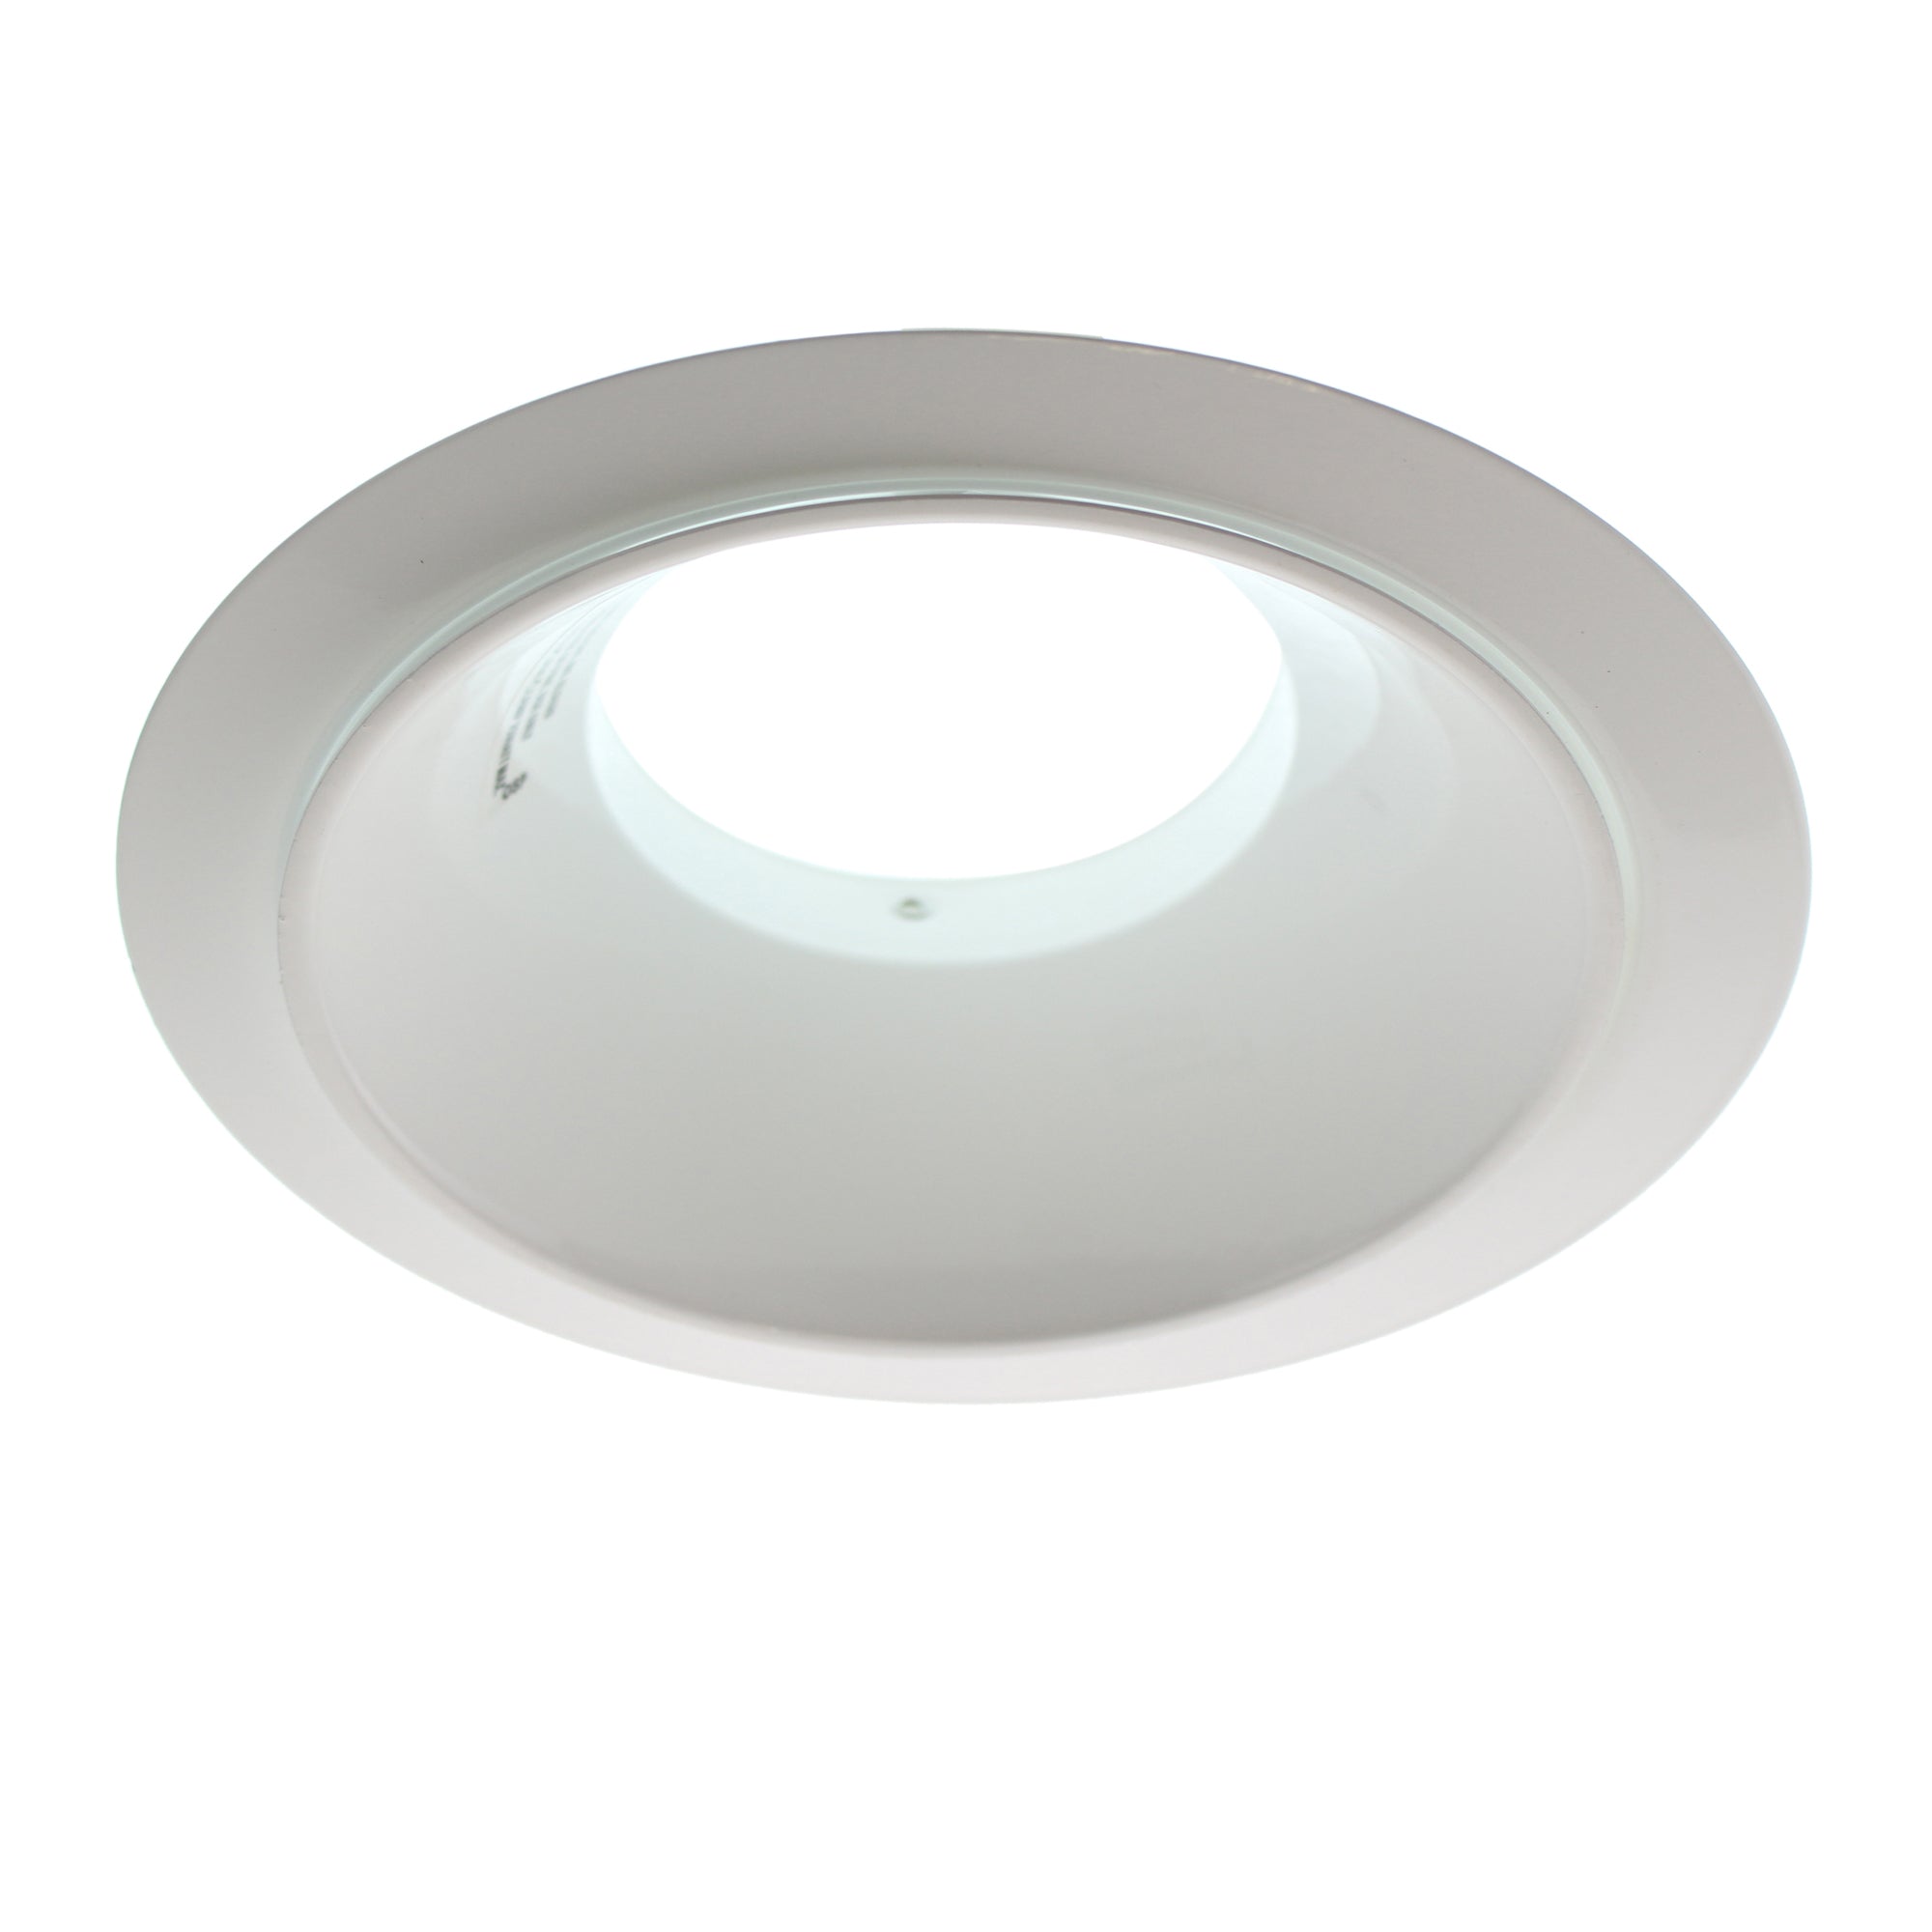 Elco Lighting, ELCO LIGHTING ELS520W RECESSED SPECULAR REFLECTOR TRIM, 5-INCH, ALL WHITE